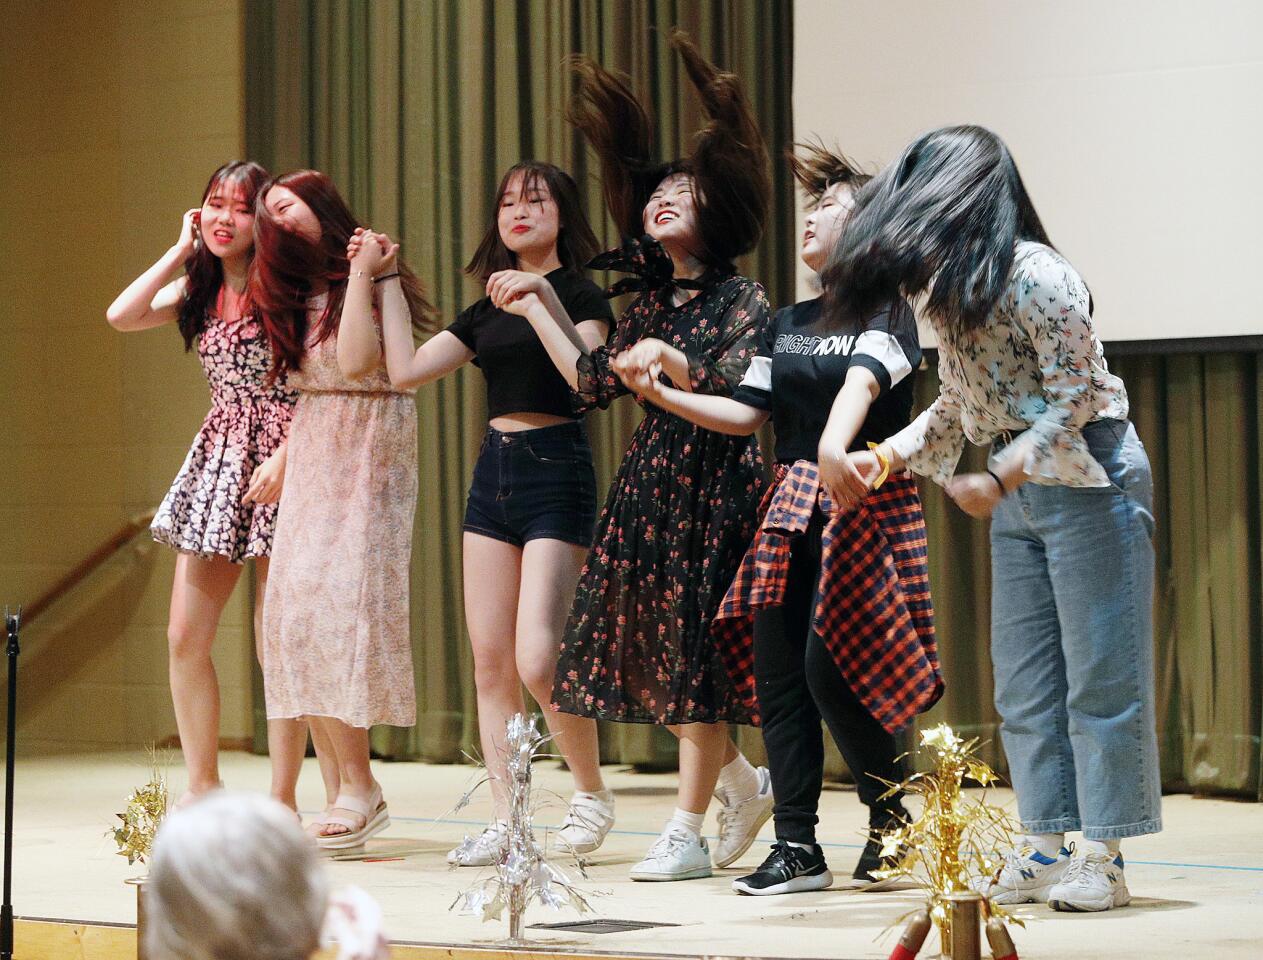 Photo Gallery: Korean student delegation farewell party in Burbank